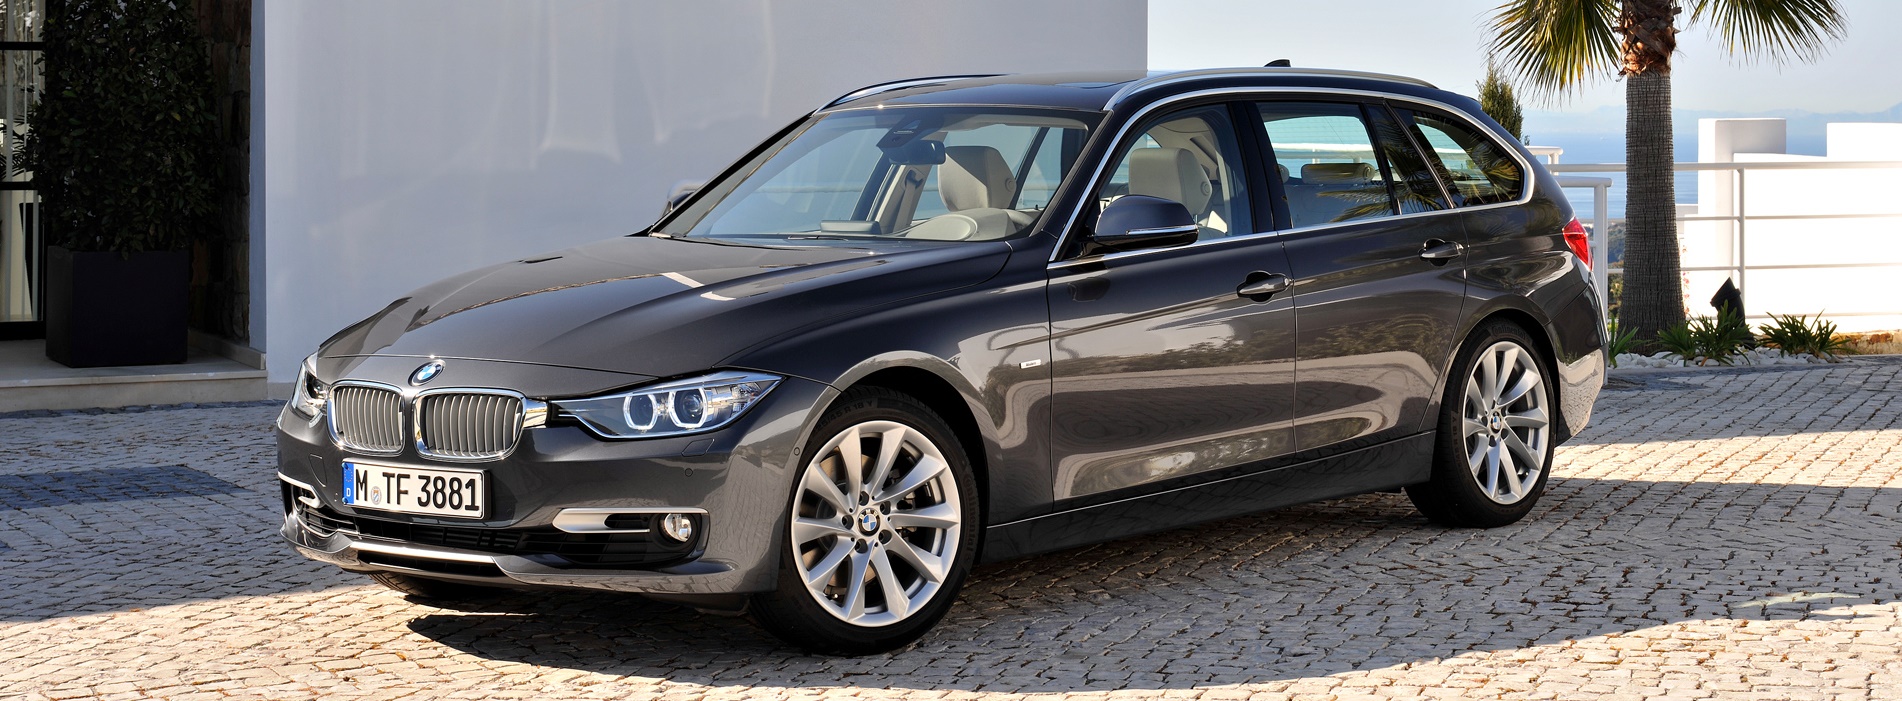 BMW SERIE 3 318d Touring 